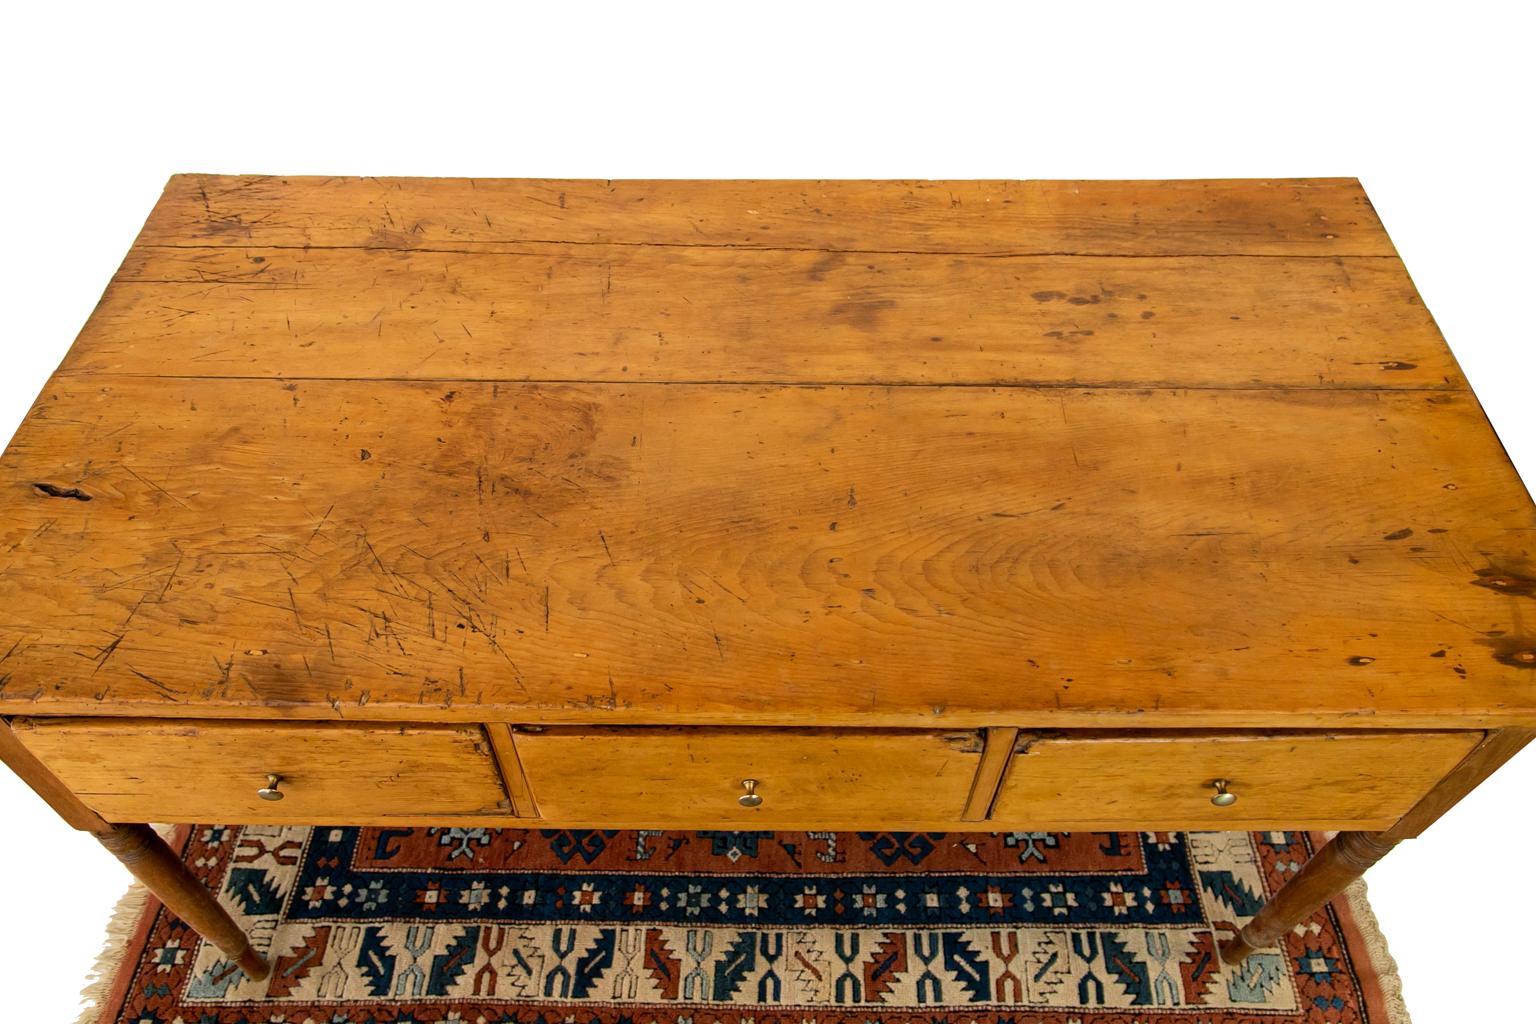 The top of this console table has shrinkage separations and multiple scaring on the top surface patina.